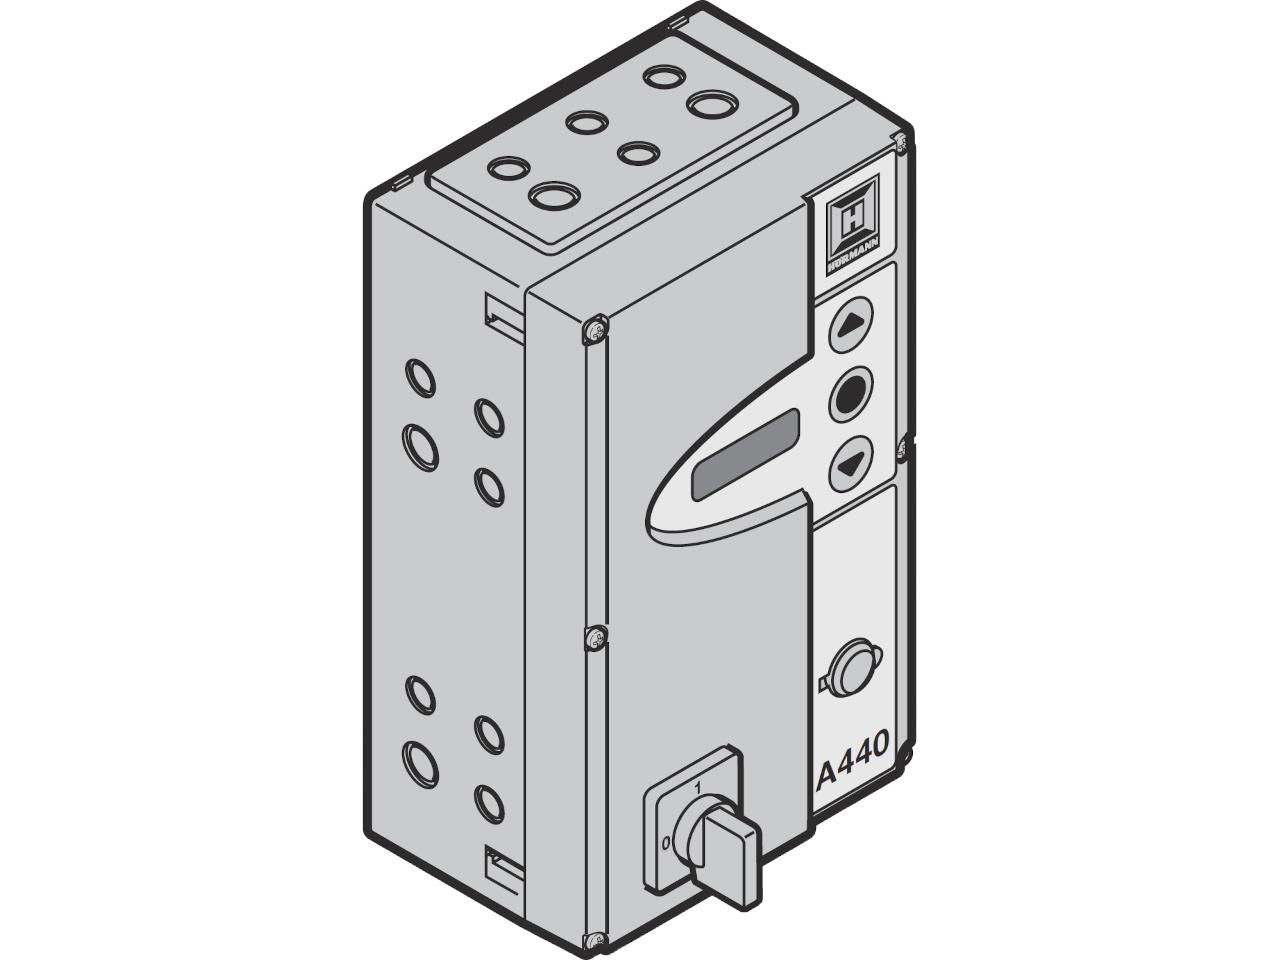 Hormann Door Control A 445 complete in Enclosure with main switch and profile half cylinder